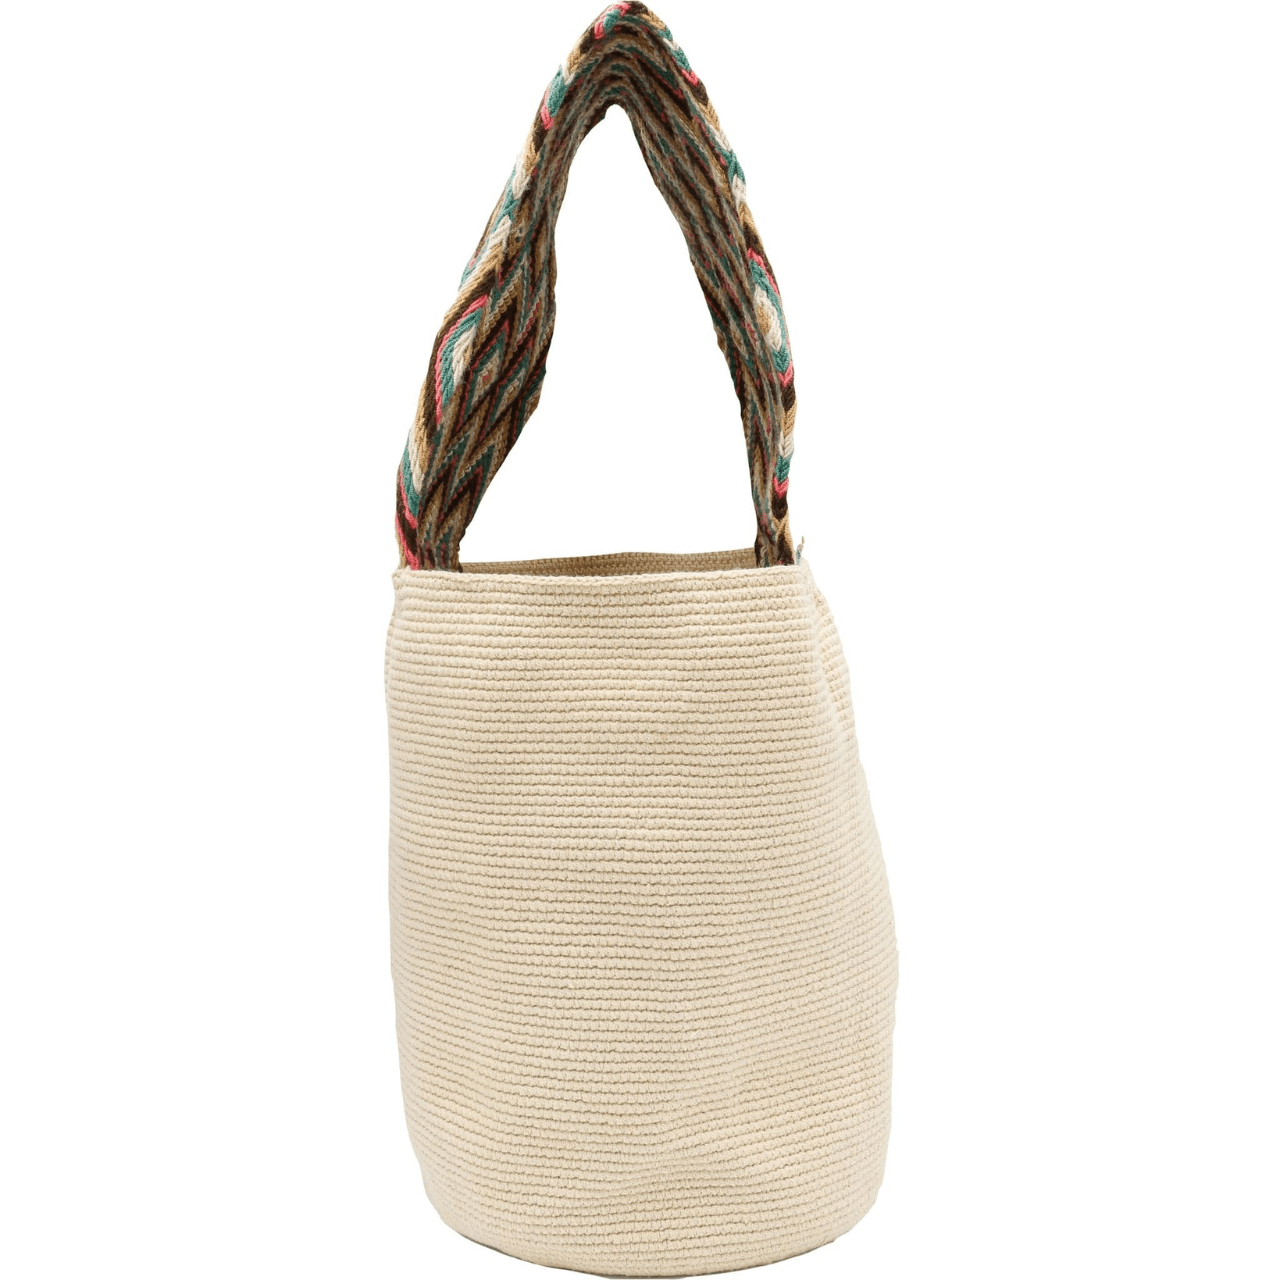 A solid beige Banu Wayuu Colombian Bag with a wide macramé handle adorned with vibrant colors. The bag features a wide short strap, making it a bold statement piece that beautifully complements the bag's body.